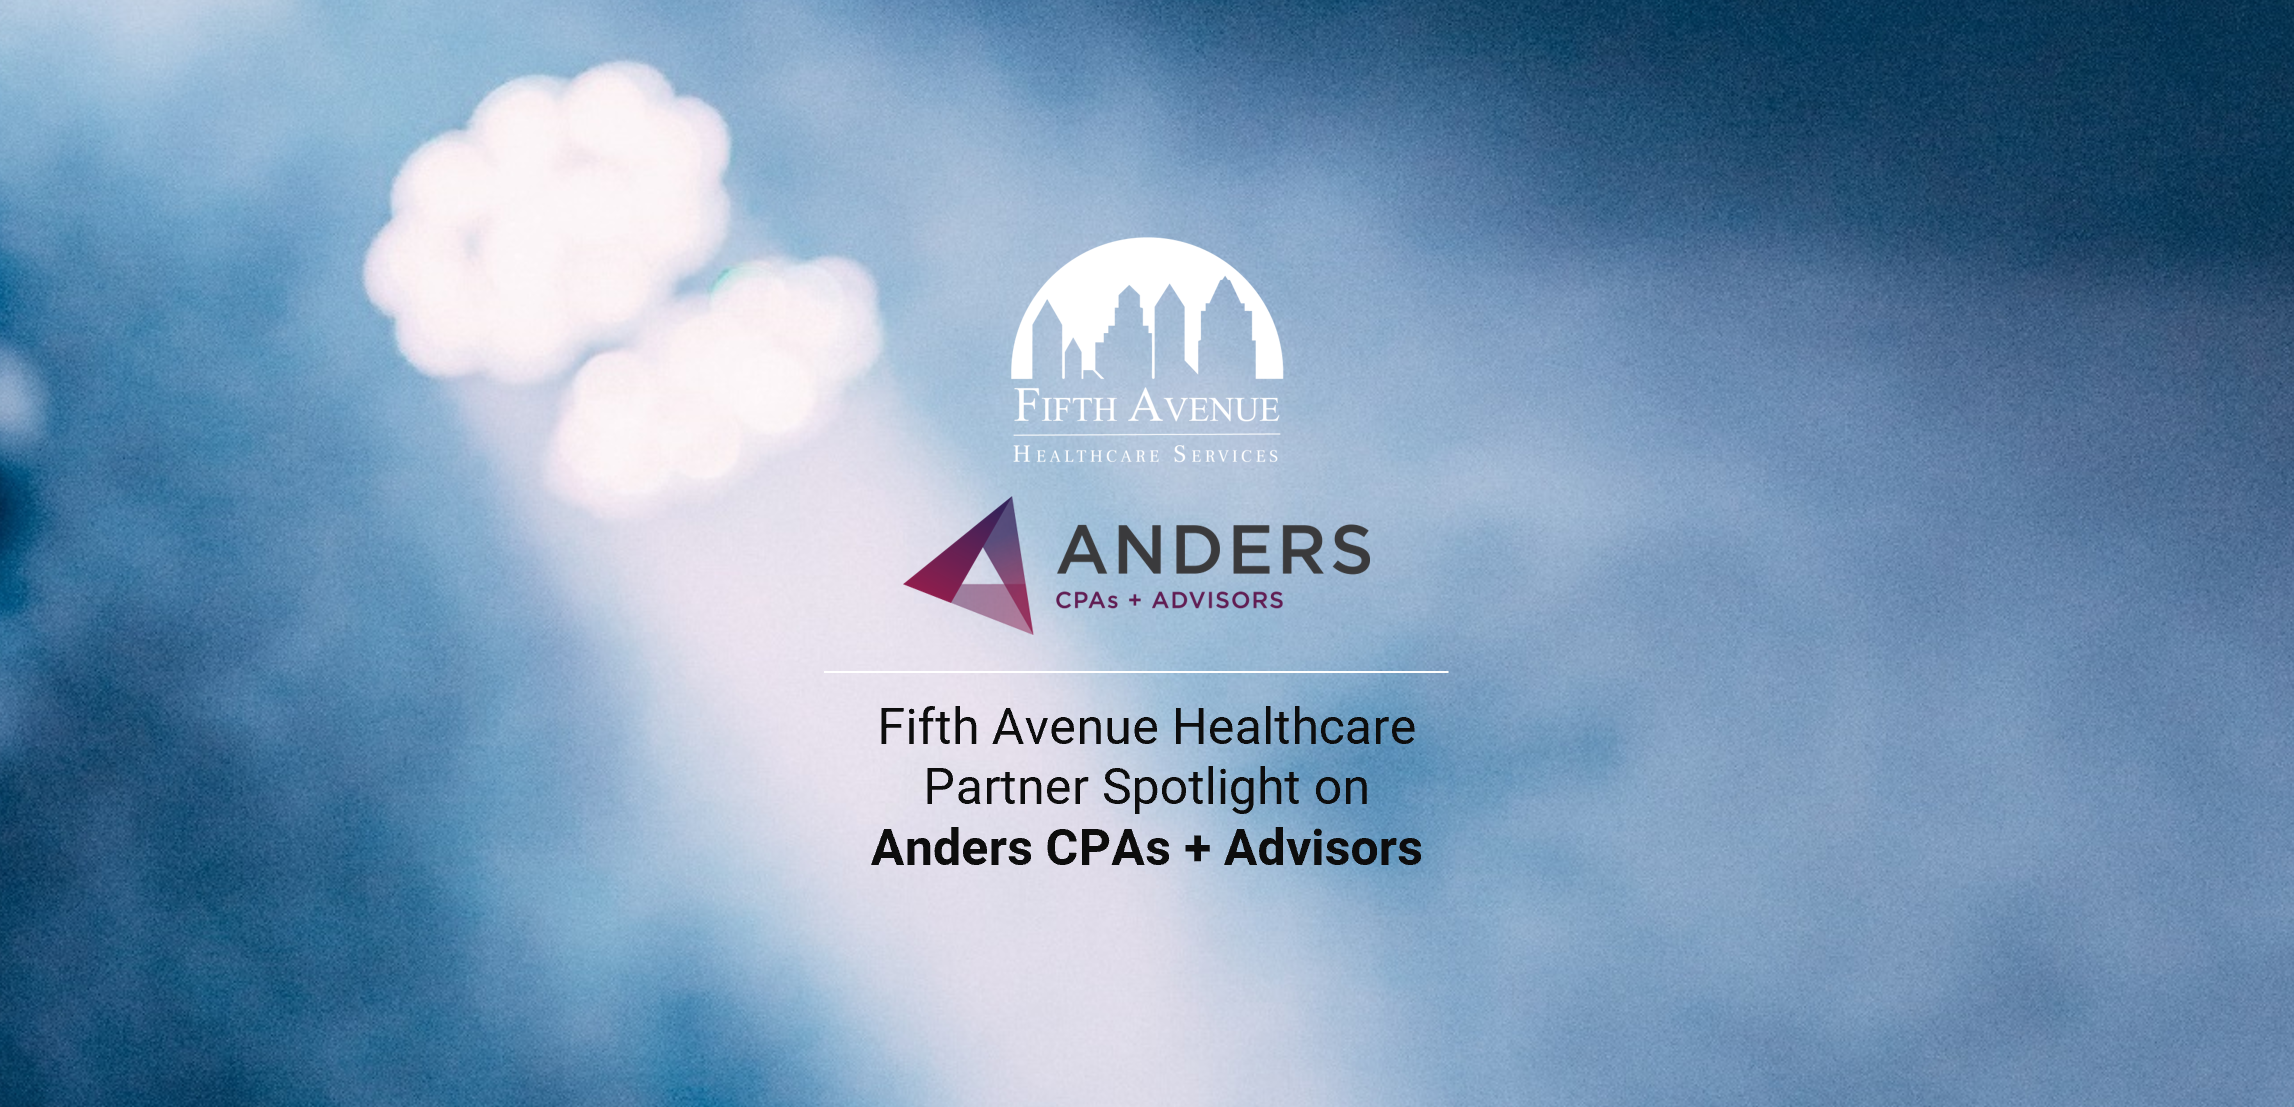 Anders CPAs Partnership Spotlight with Fifth Avenue Healthcare Services 2022